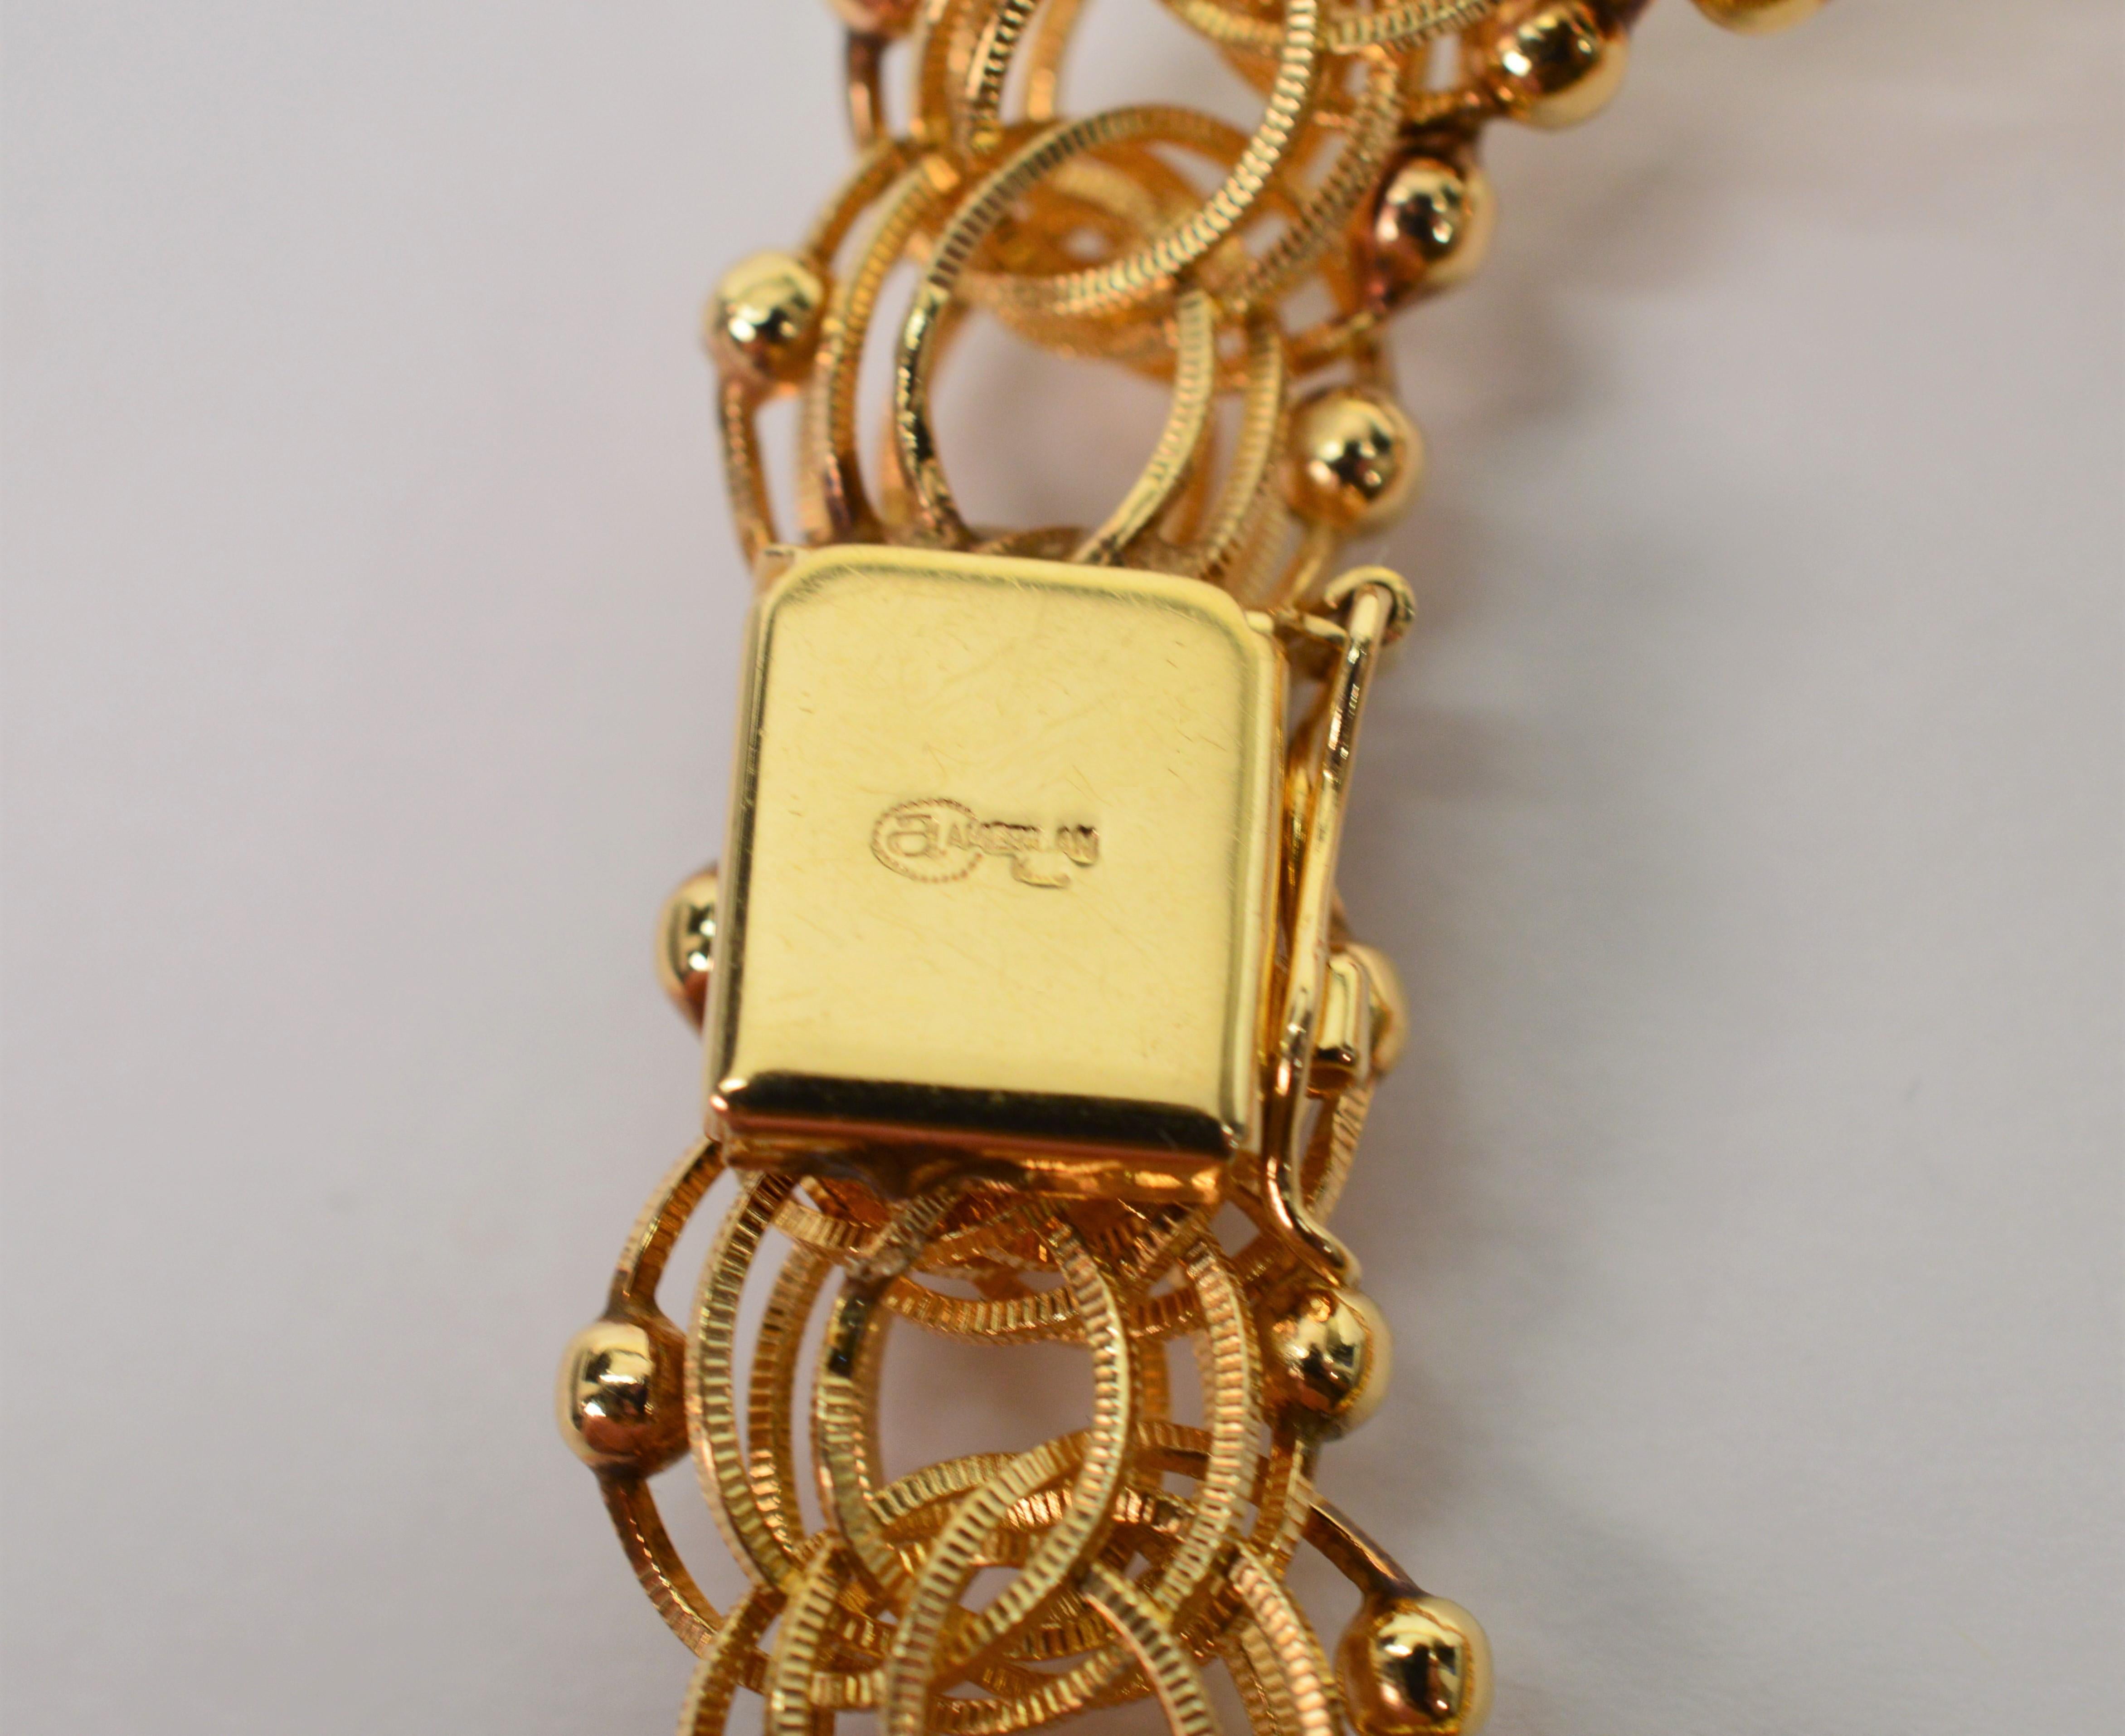 Interlocking Chain Link 14 Karat Yellow Gold Bracelet In Excellent Condition For Sale In Mount Kisco, NY